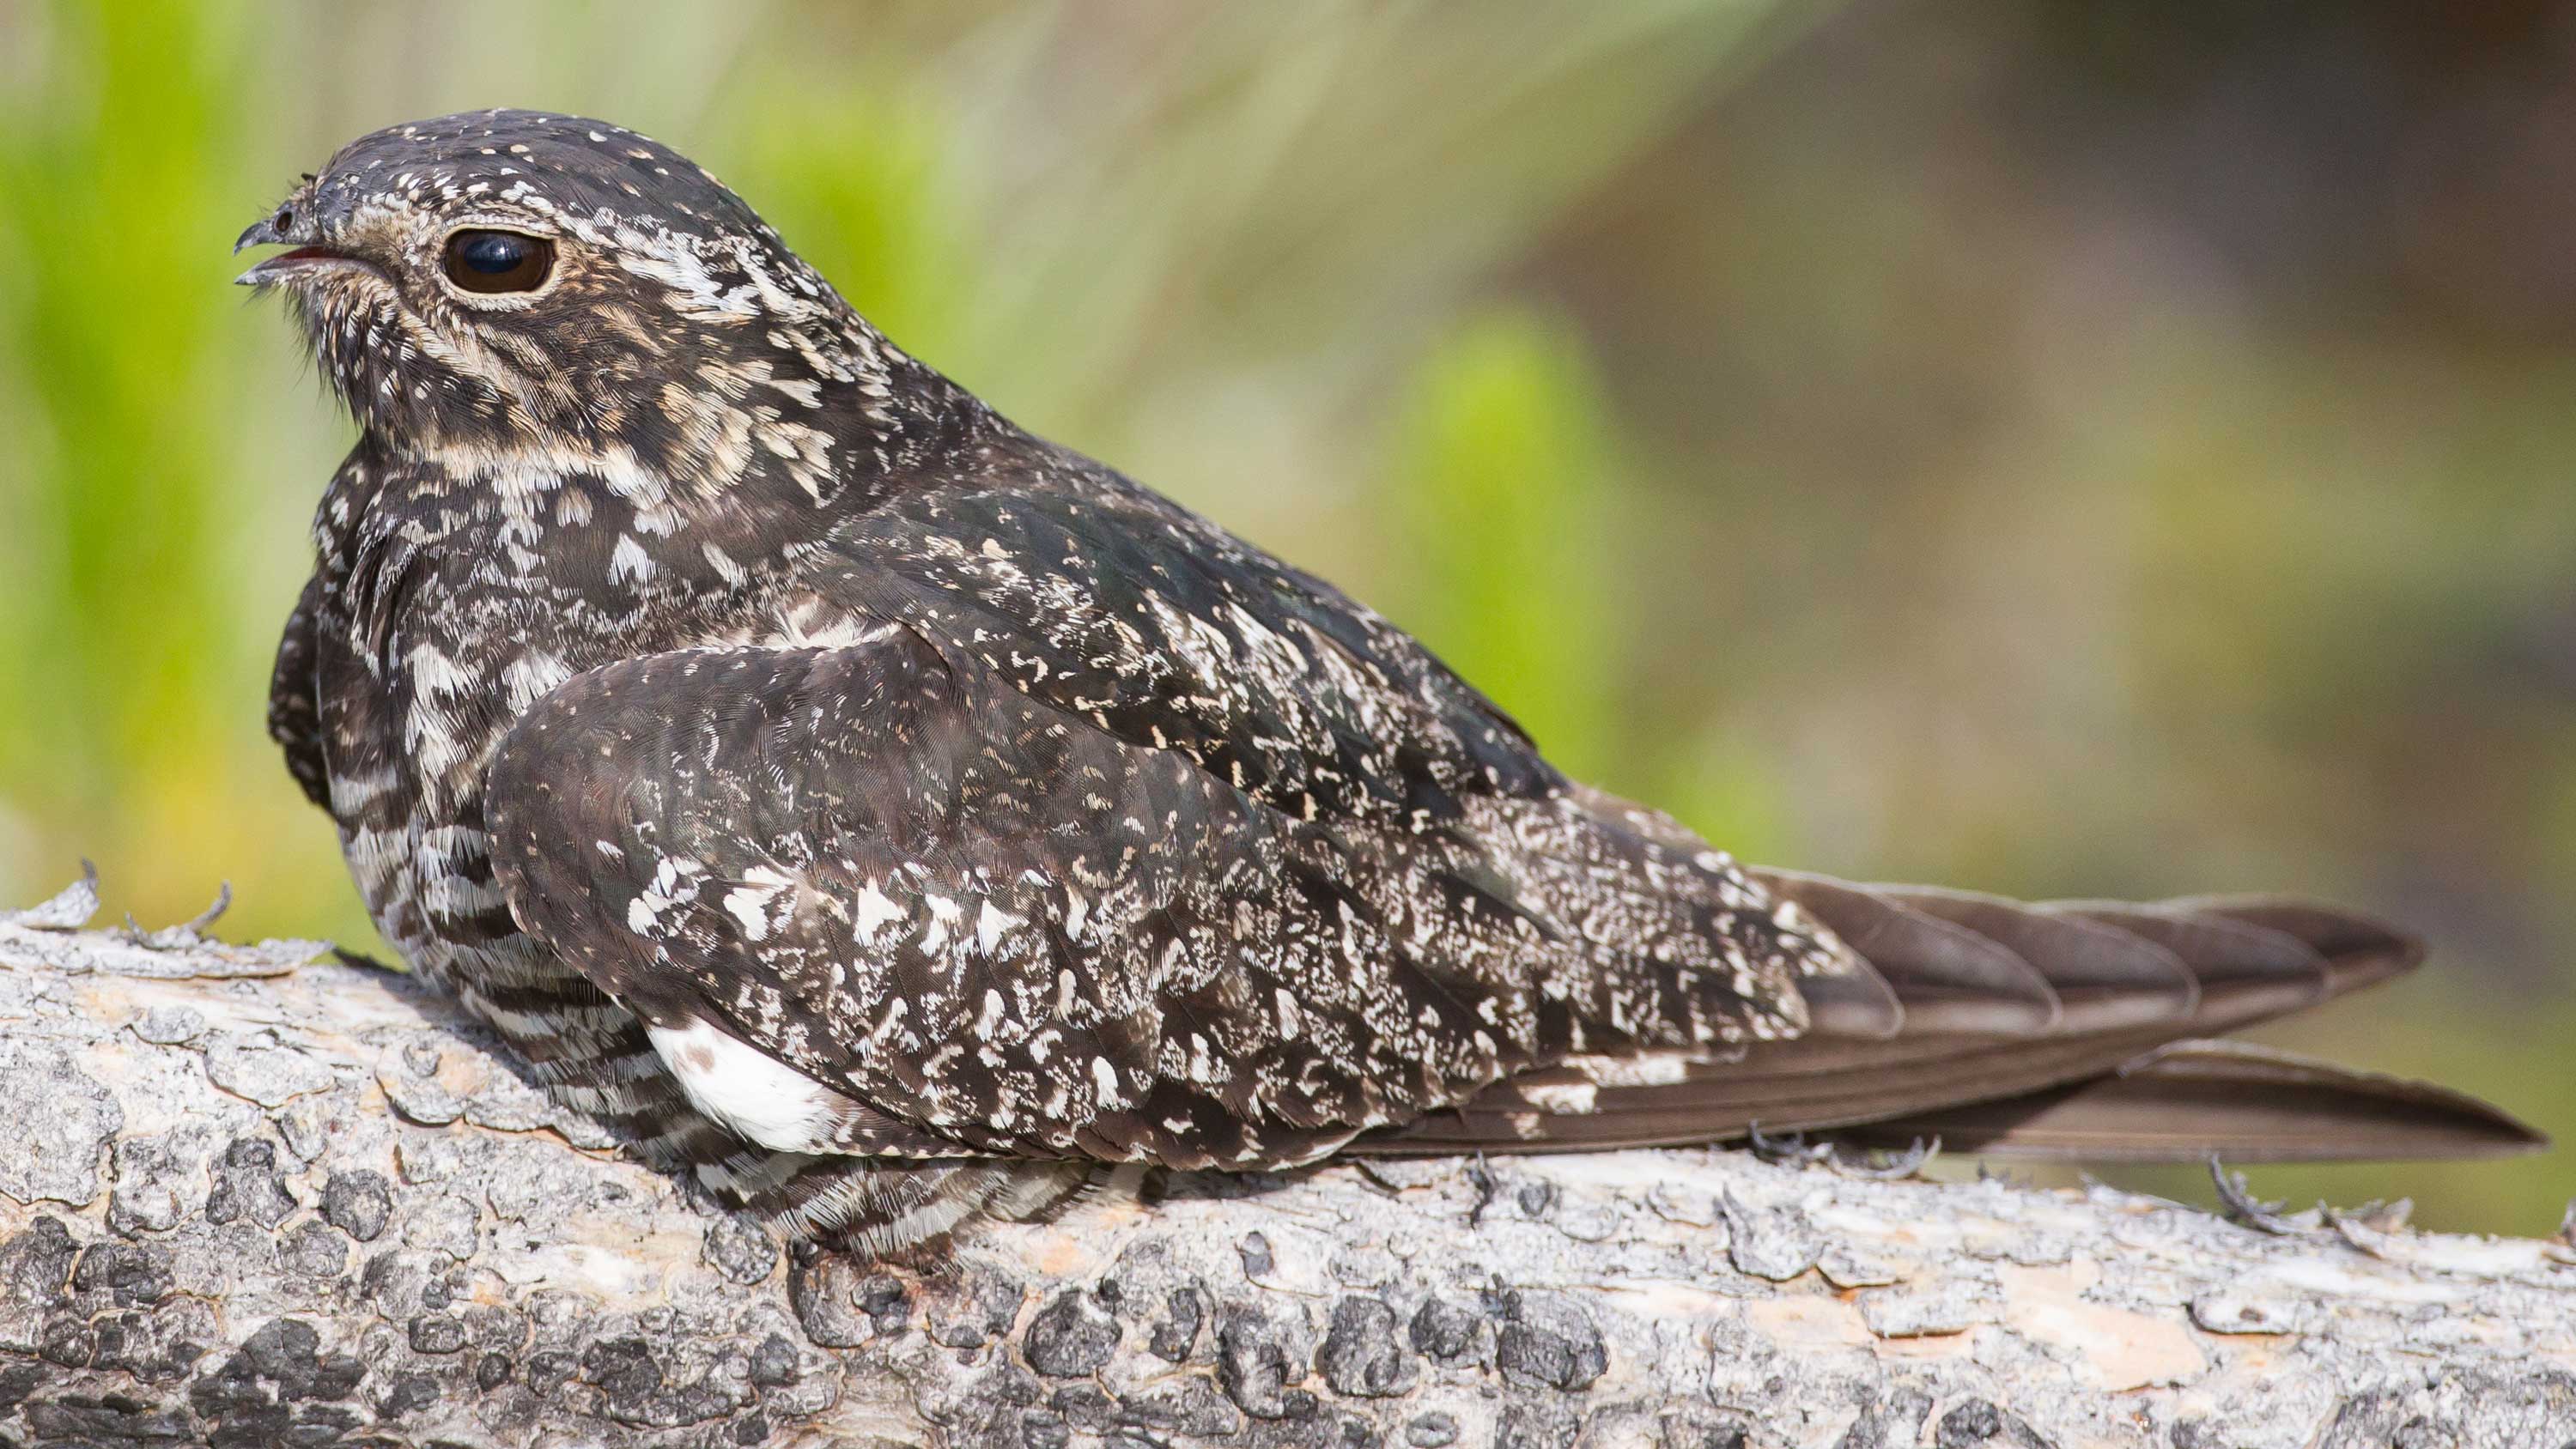 The Common Nighthawk perched on a branch